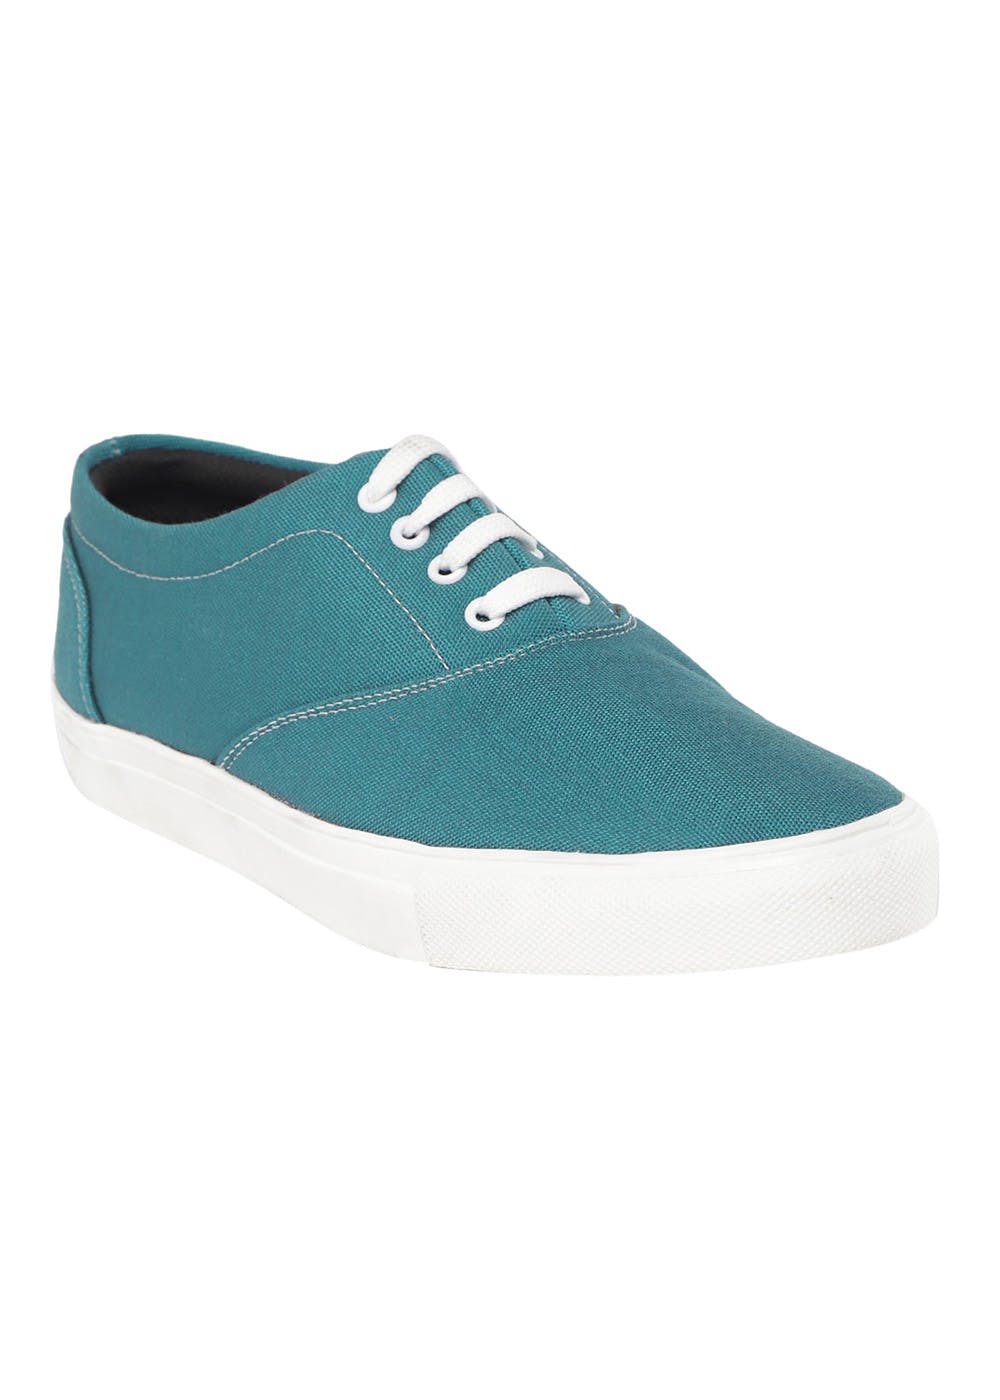 Classic Solid Sage Green Sneakers